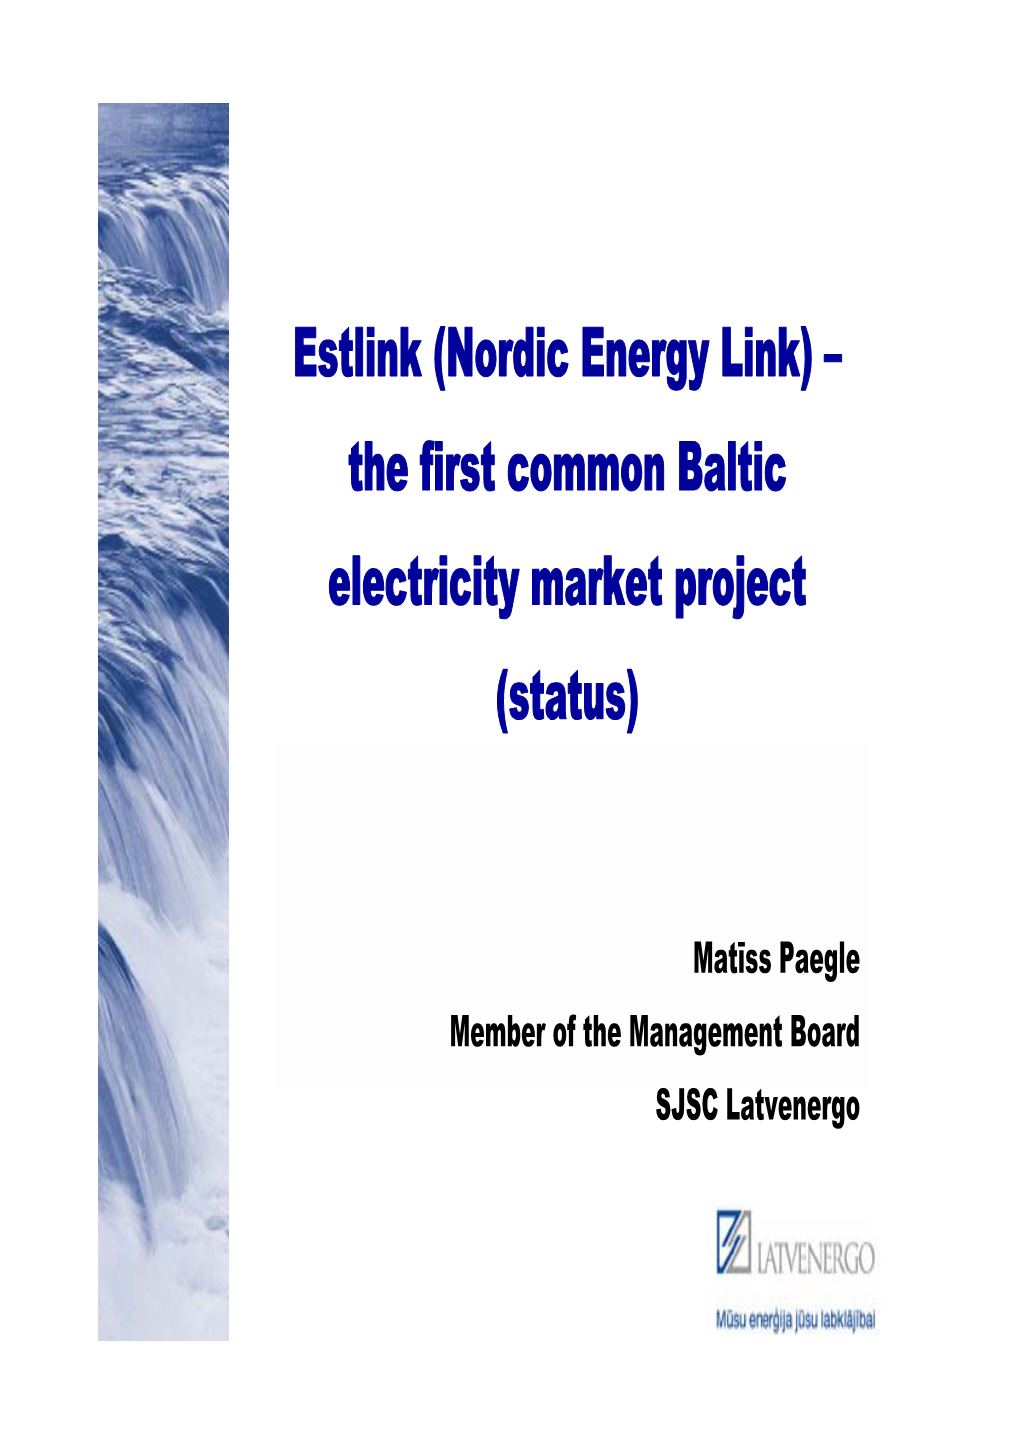 Estlink (Nordic Energy Link) – the First Common Baltic Electricity Market Project (Status)